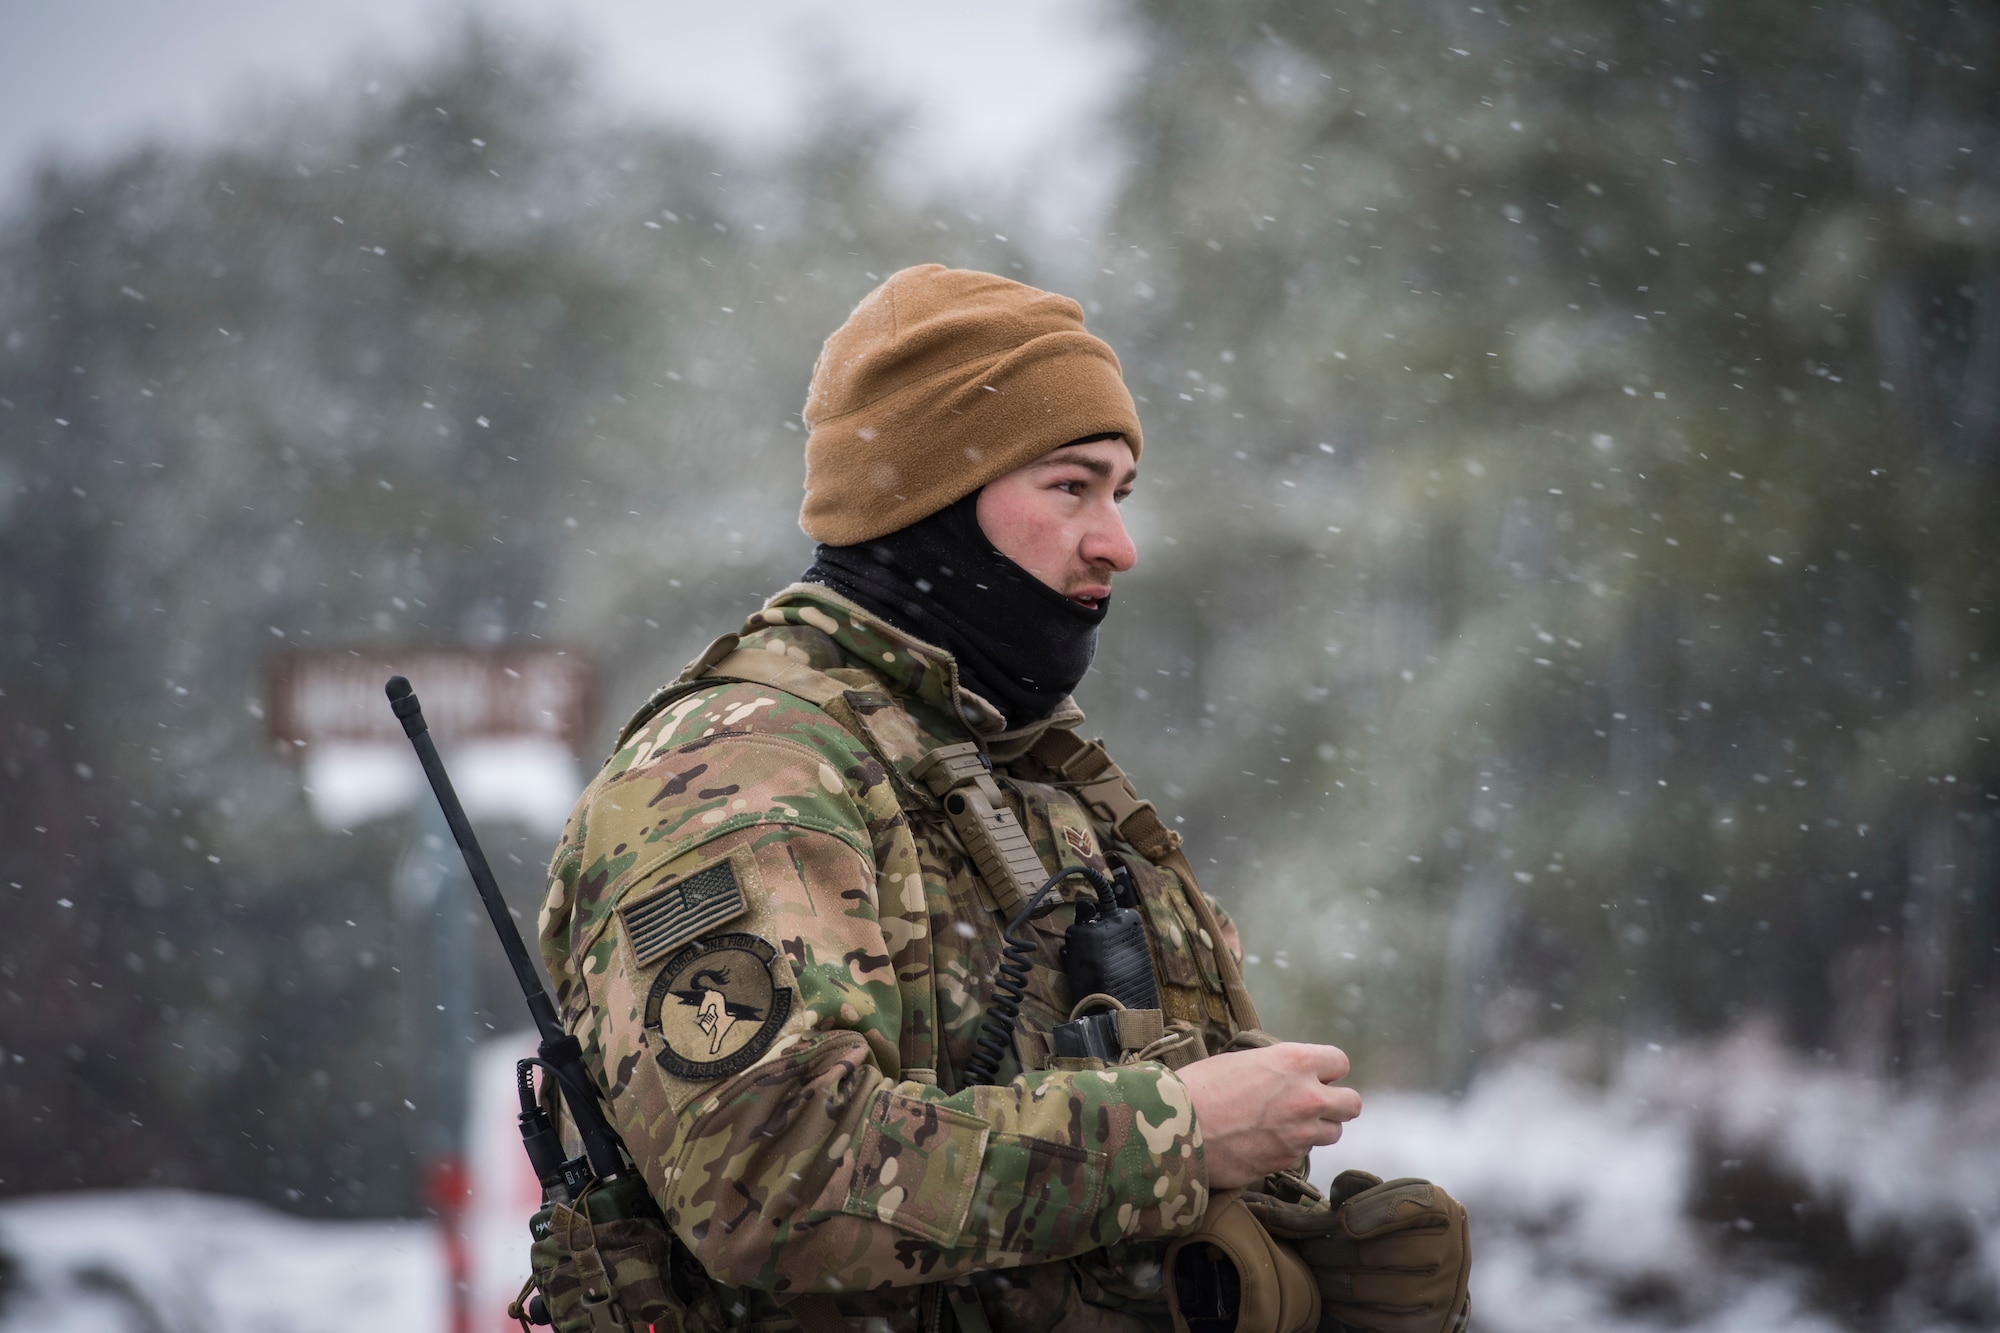 Senior Airman Ian Brown, 824th Base Defense Squadron fireteam member, walks in the snow during a Mission Readiness Exercise, March 13, 2018, at Joint Base McGuire-Dix Lakehurst, N.J. Evaluators tested the 824th BDS from Moody Air Force Base, Ga., and the 105th Security Forces Squadron from Stewart Air National Guard Base, N.Y., to ensure their combat readiness. (U.S. Air Force photo by Senior Airman Janiqua P. Robinson)